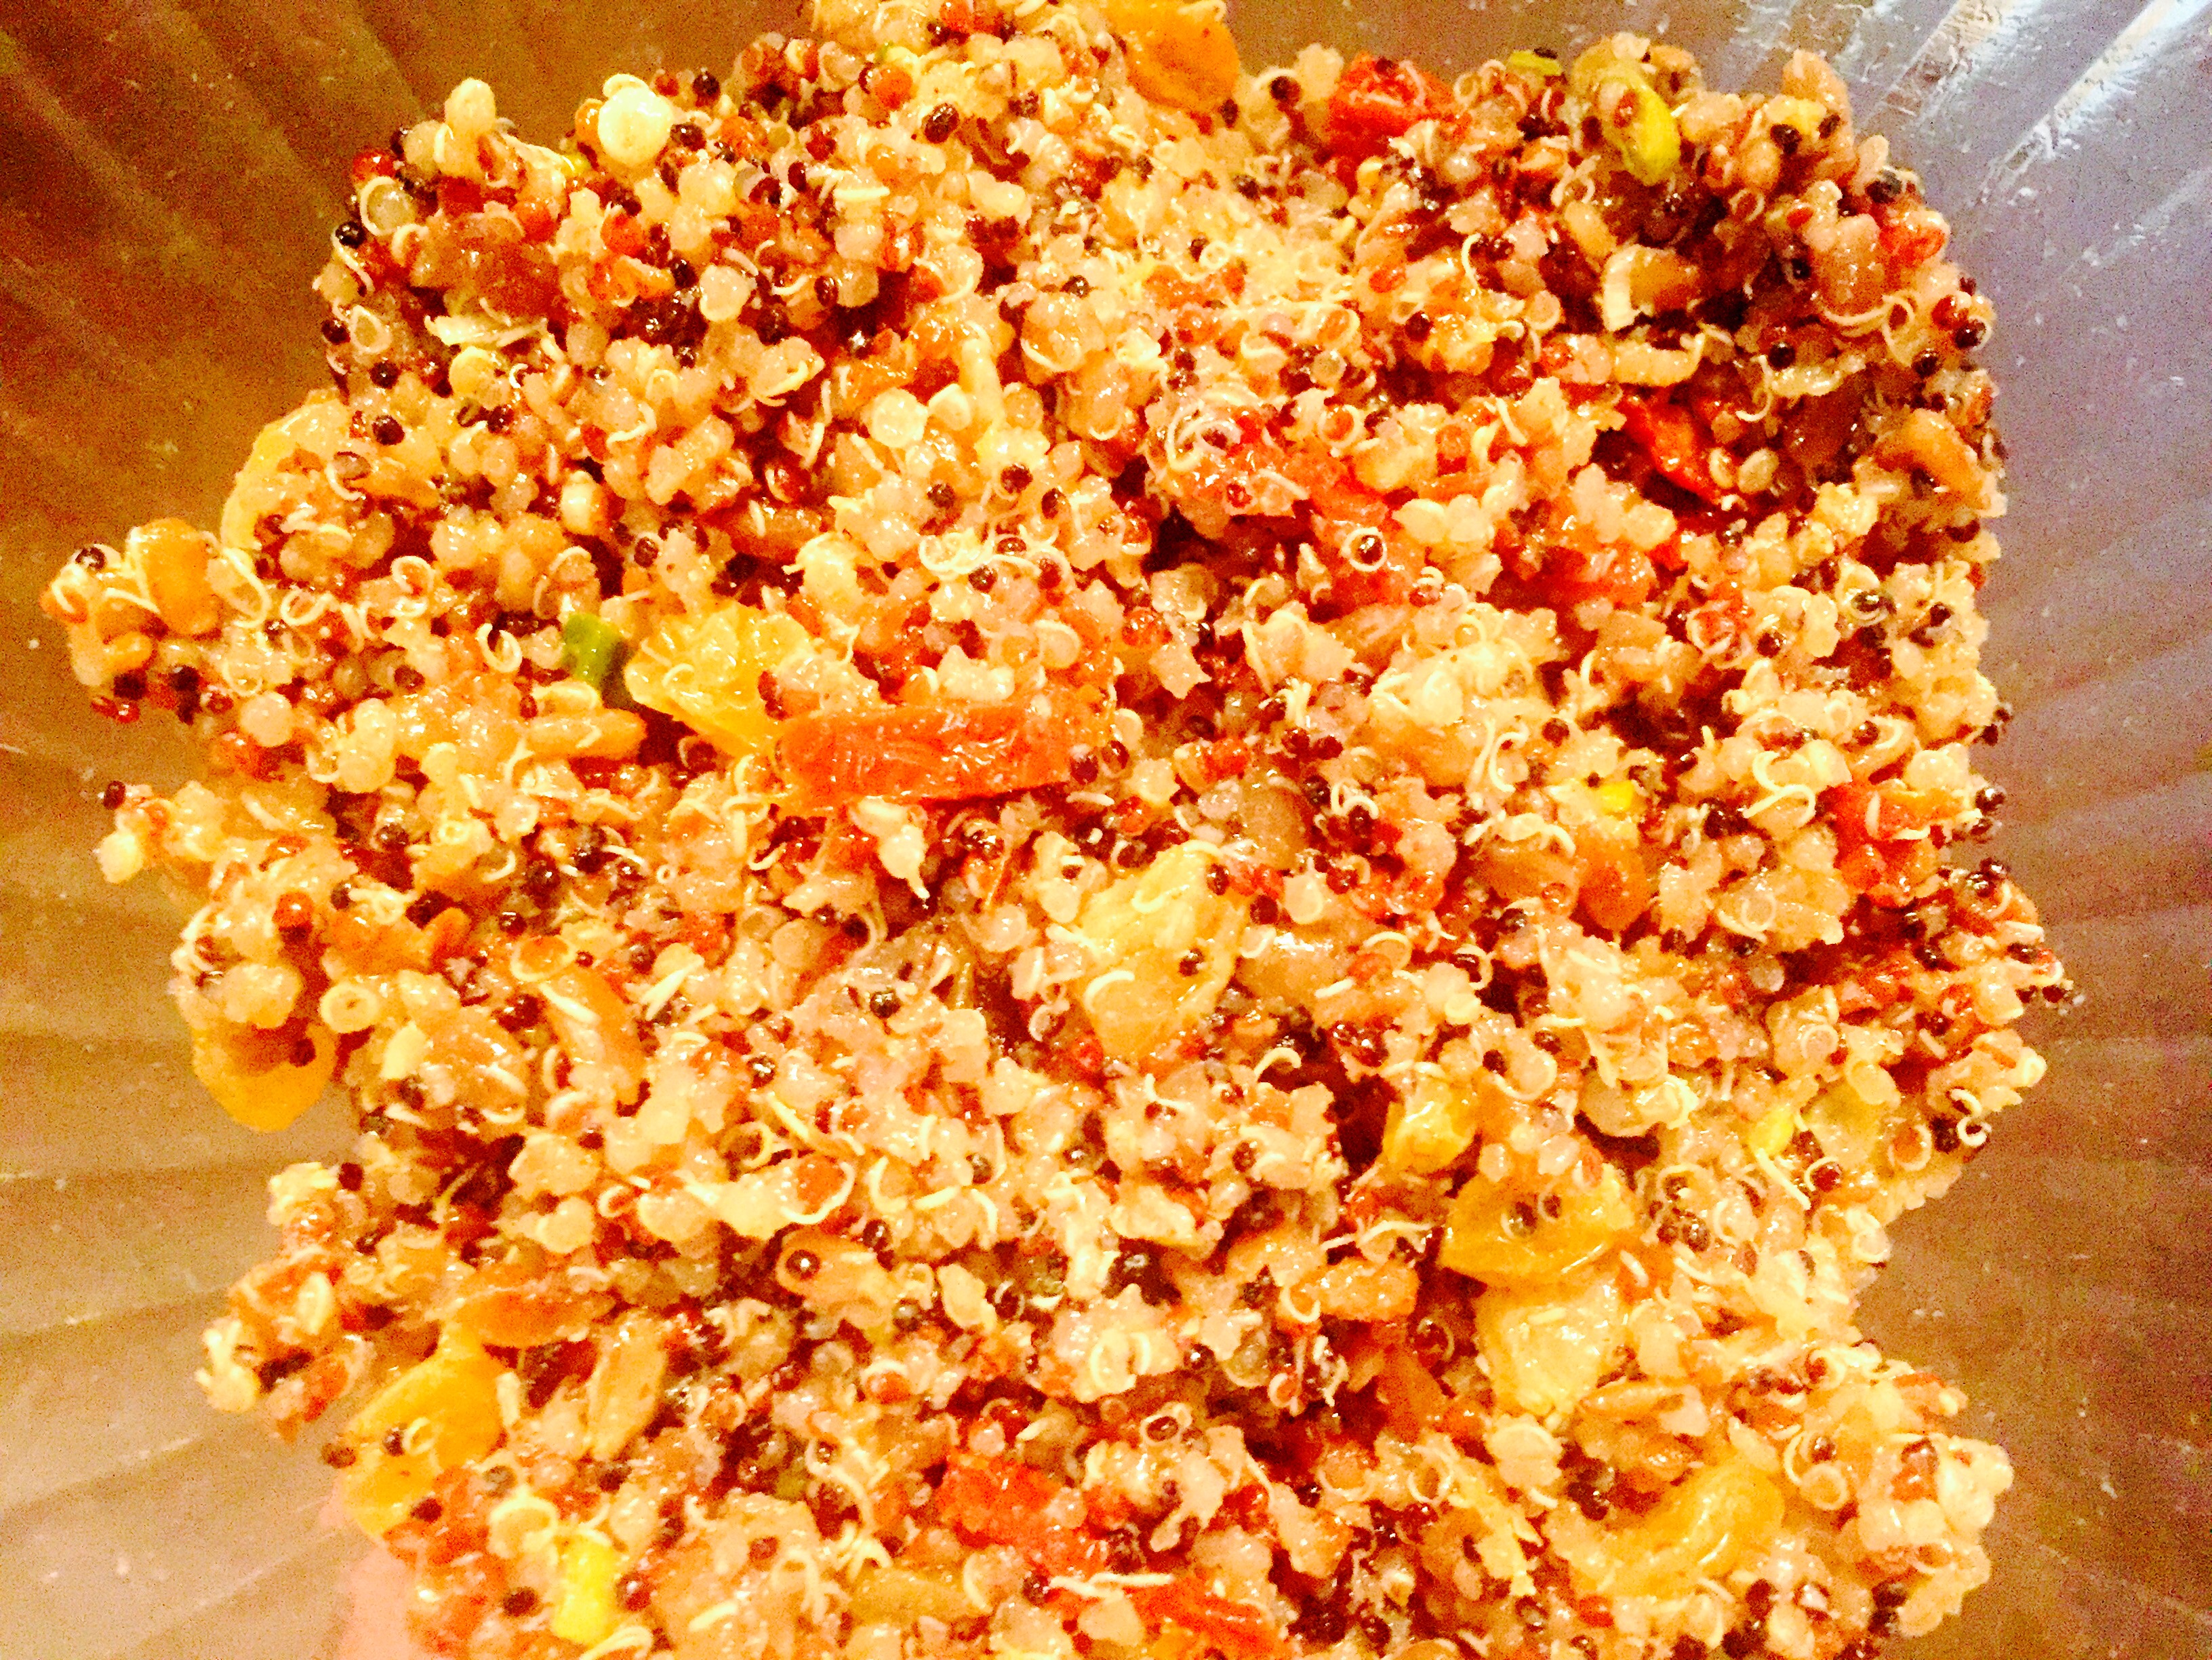 Completely addictive quinoa salad with sun derived tomatoes, golden raisins and toasted sunflower seeds